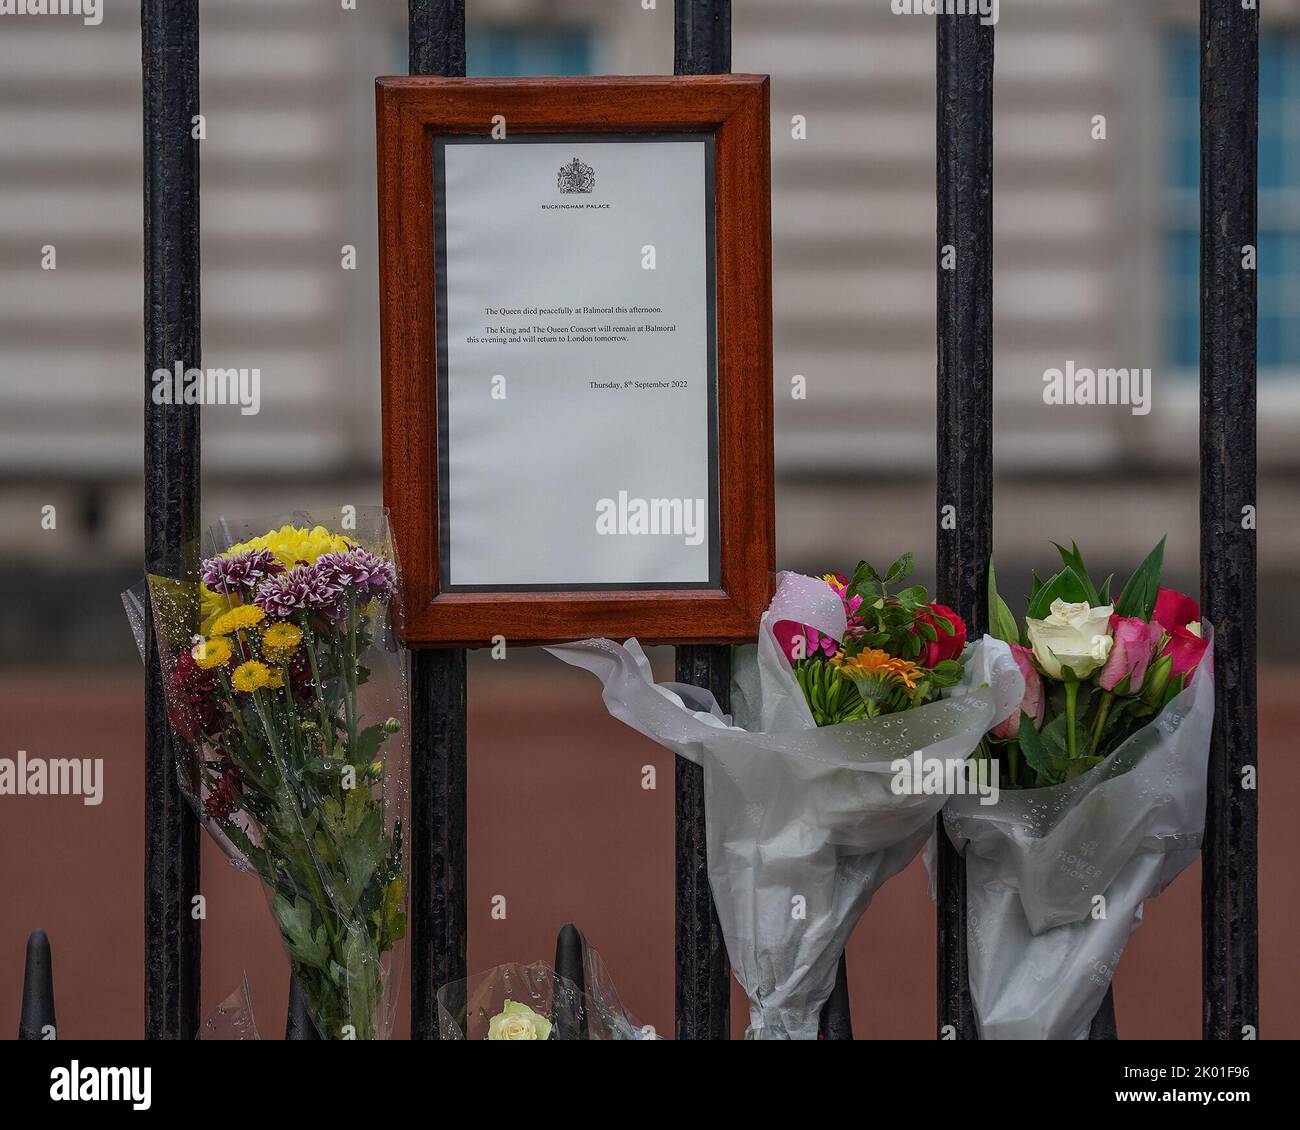 A notice of the queens death after the passing of Her Majesty The Queen at Buckingham Palace, London, United Kingdom, 9th September 2022 (Photo by Richard Washbrooke/News Images) Stock Photo